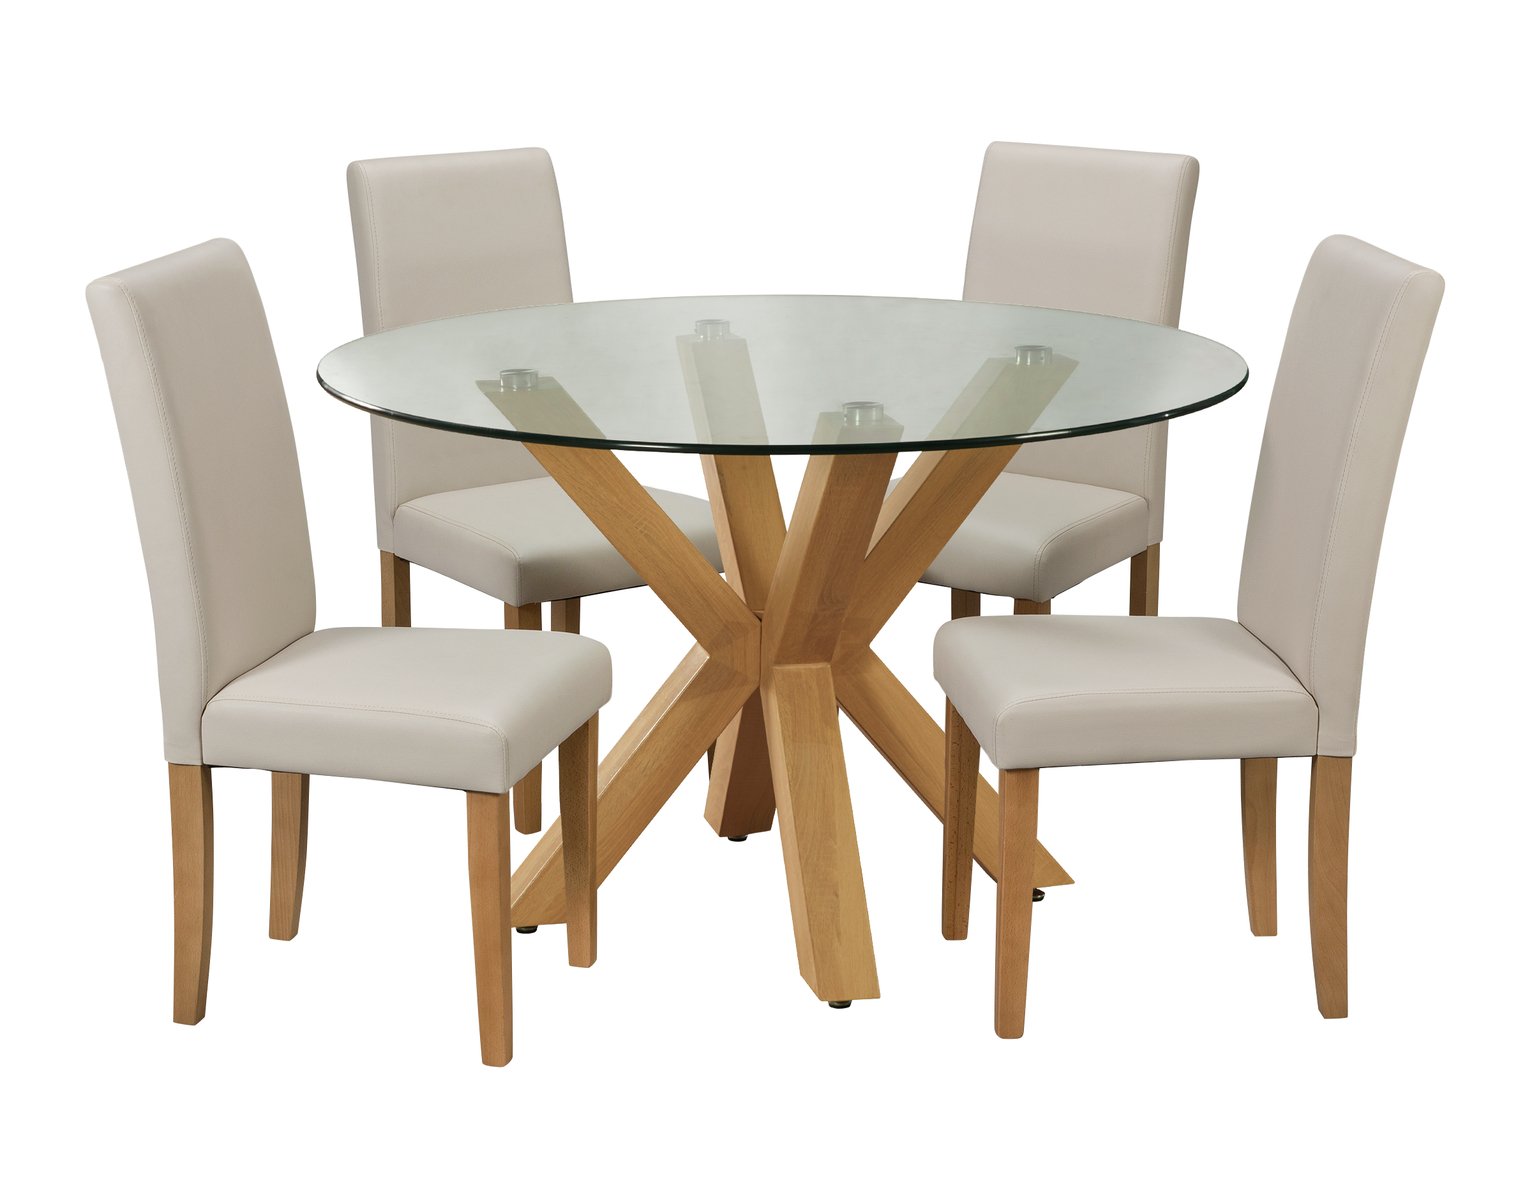 Argos Home Alden Glass Dining Table & 4 Cream Chairs